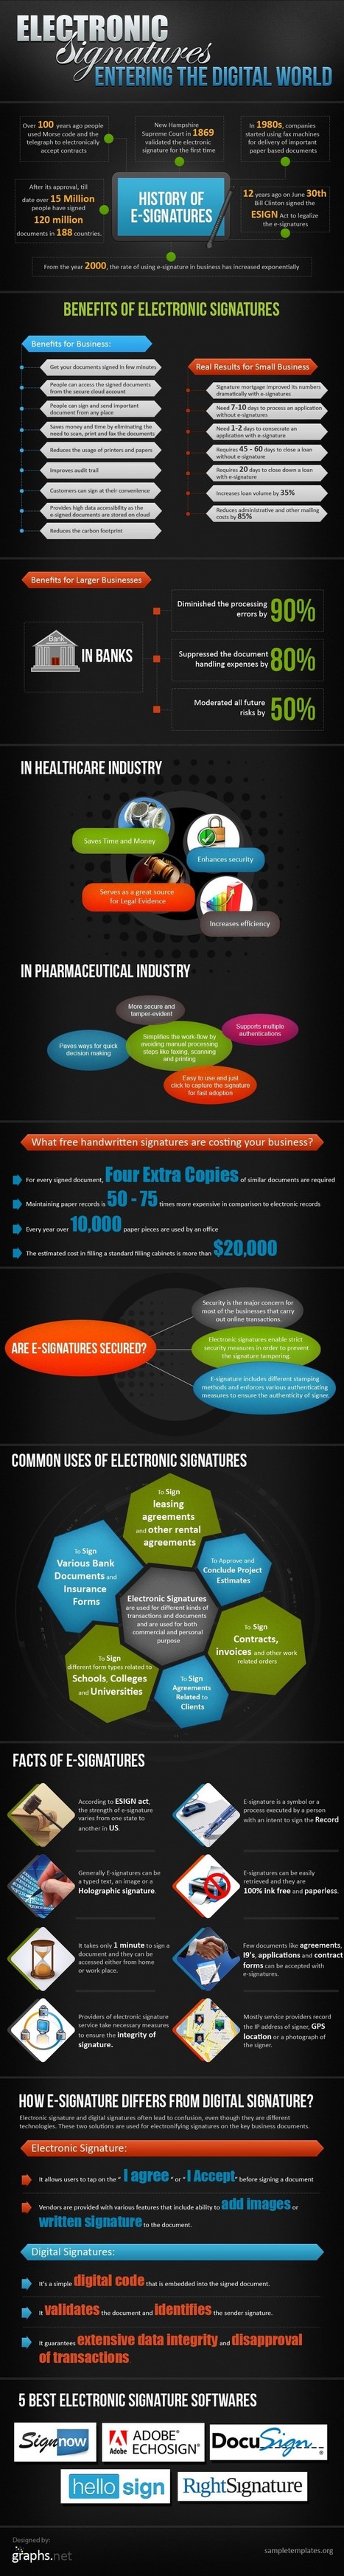 50+ Advantages of Using Electronic Signatures | All Infographics | The 21st Century | Scoop.it